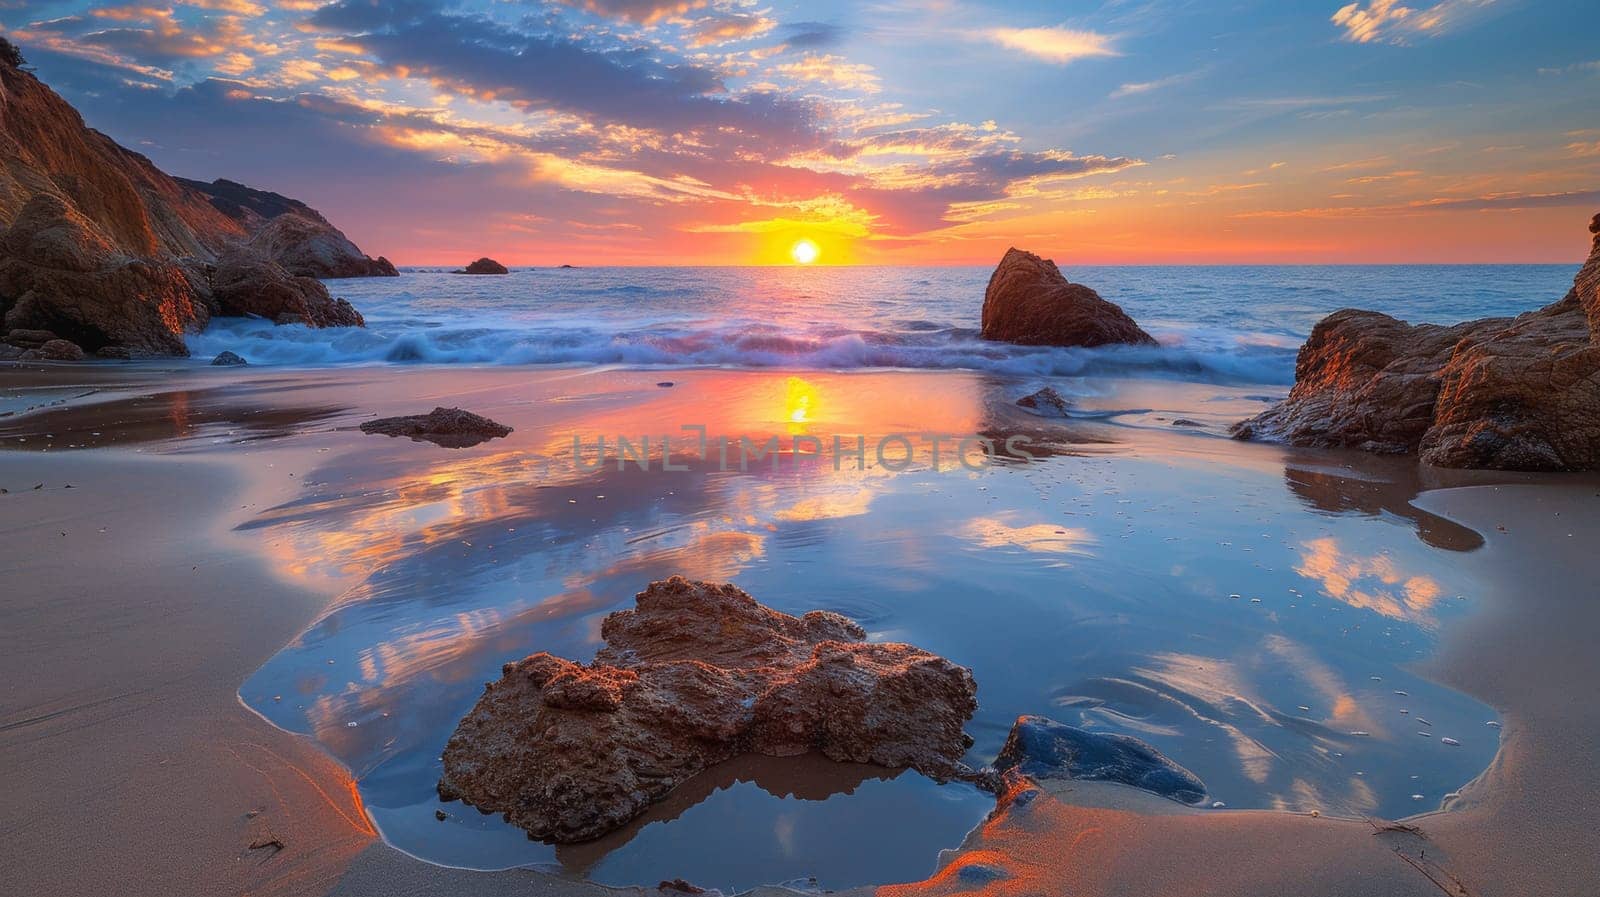 A sunset over a beach with rocks and water